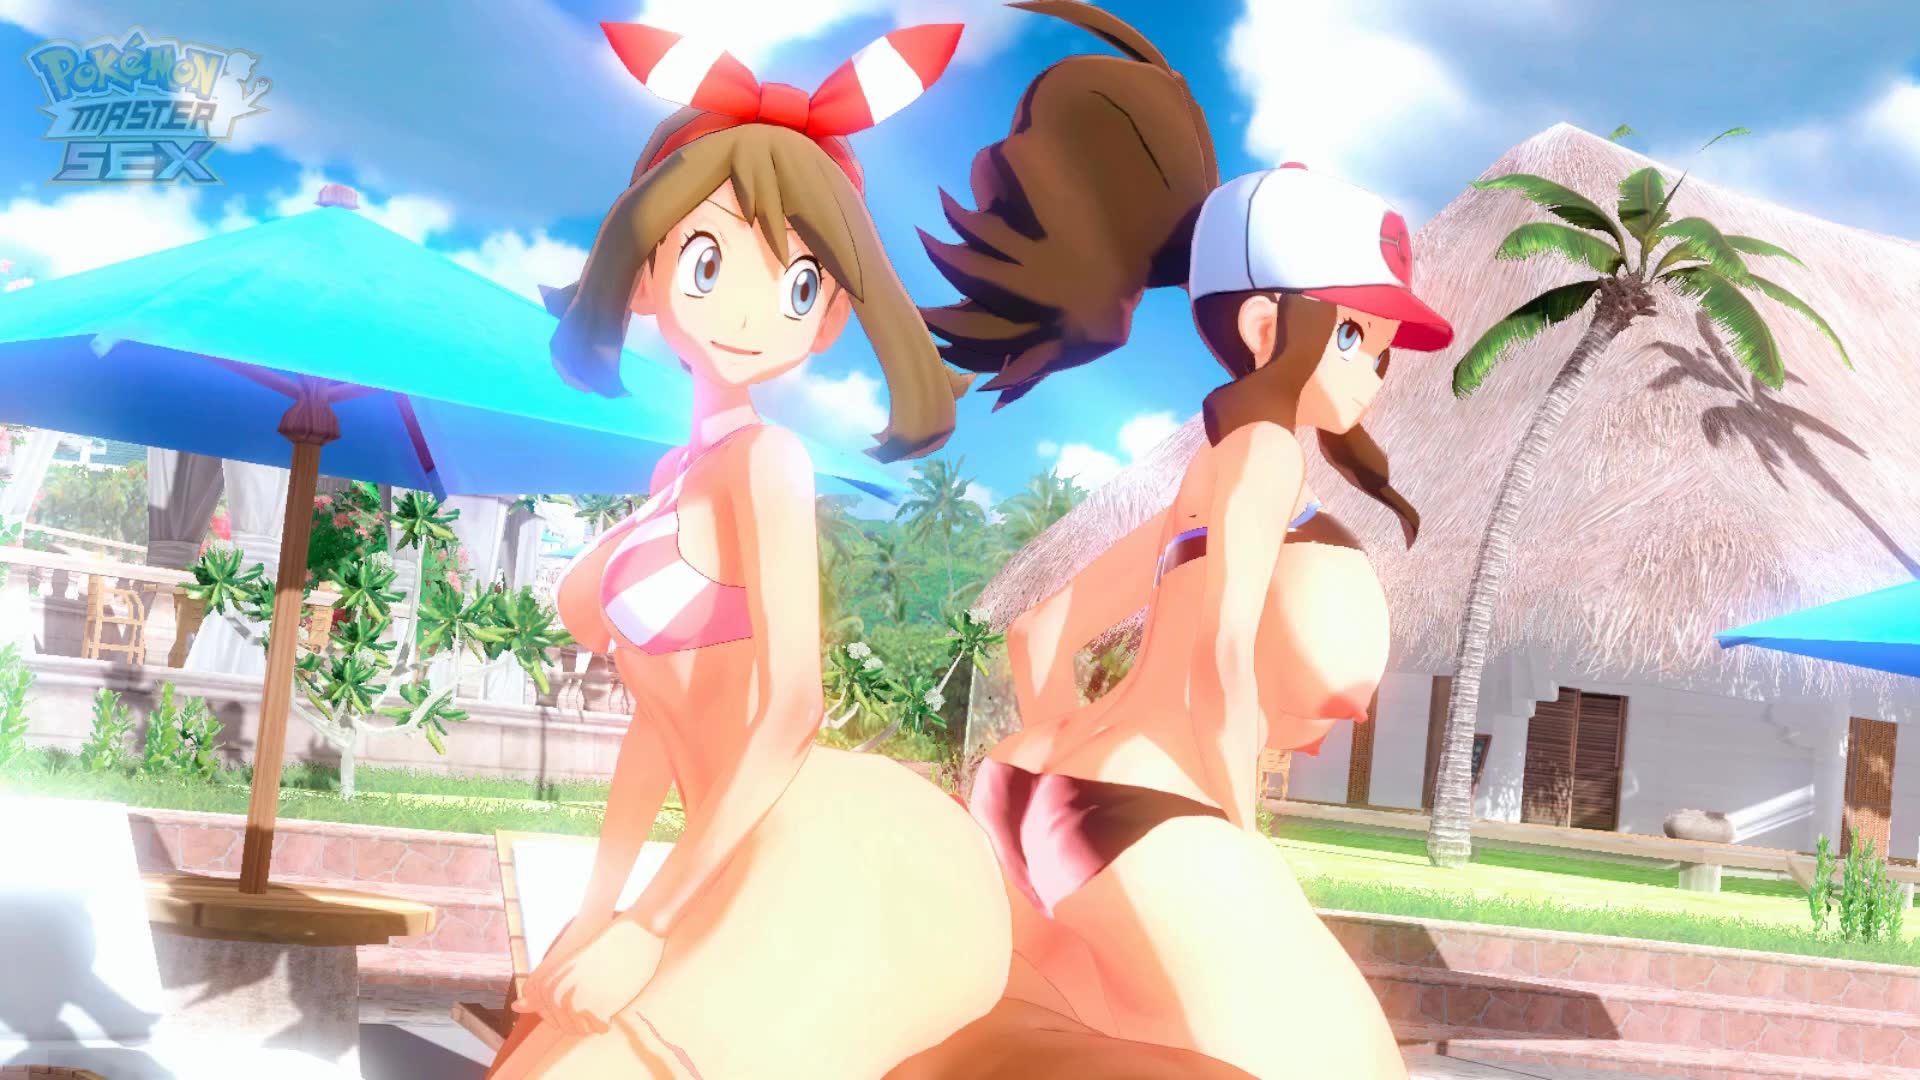 Hilda and May from Pokemon giving buttjob NSFW animation thumbnail